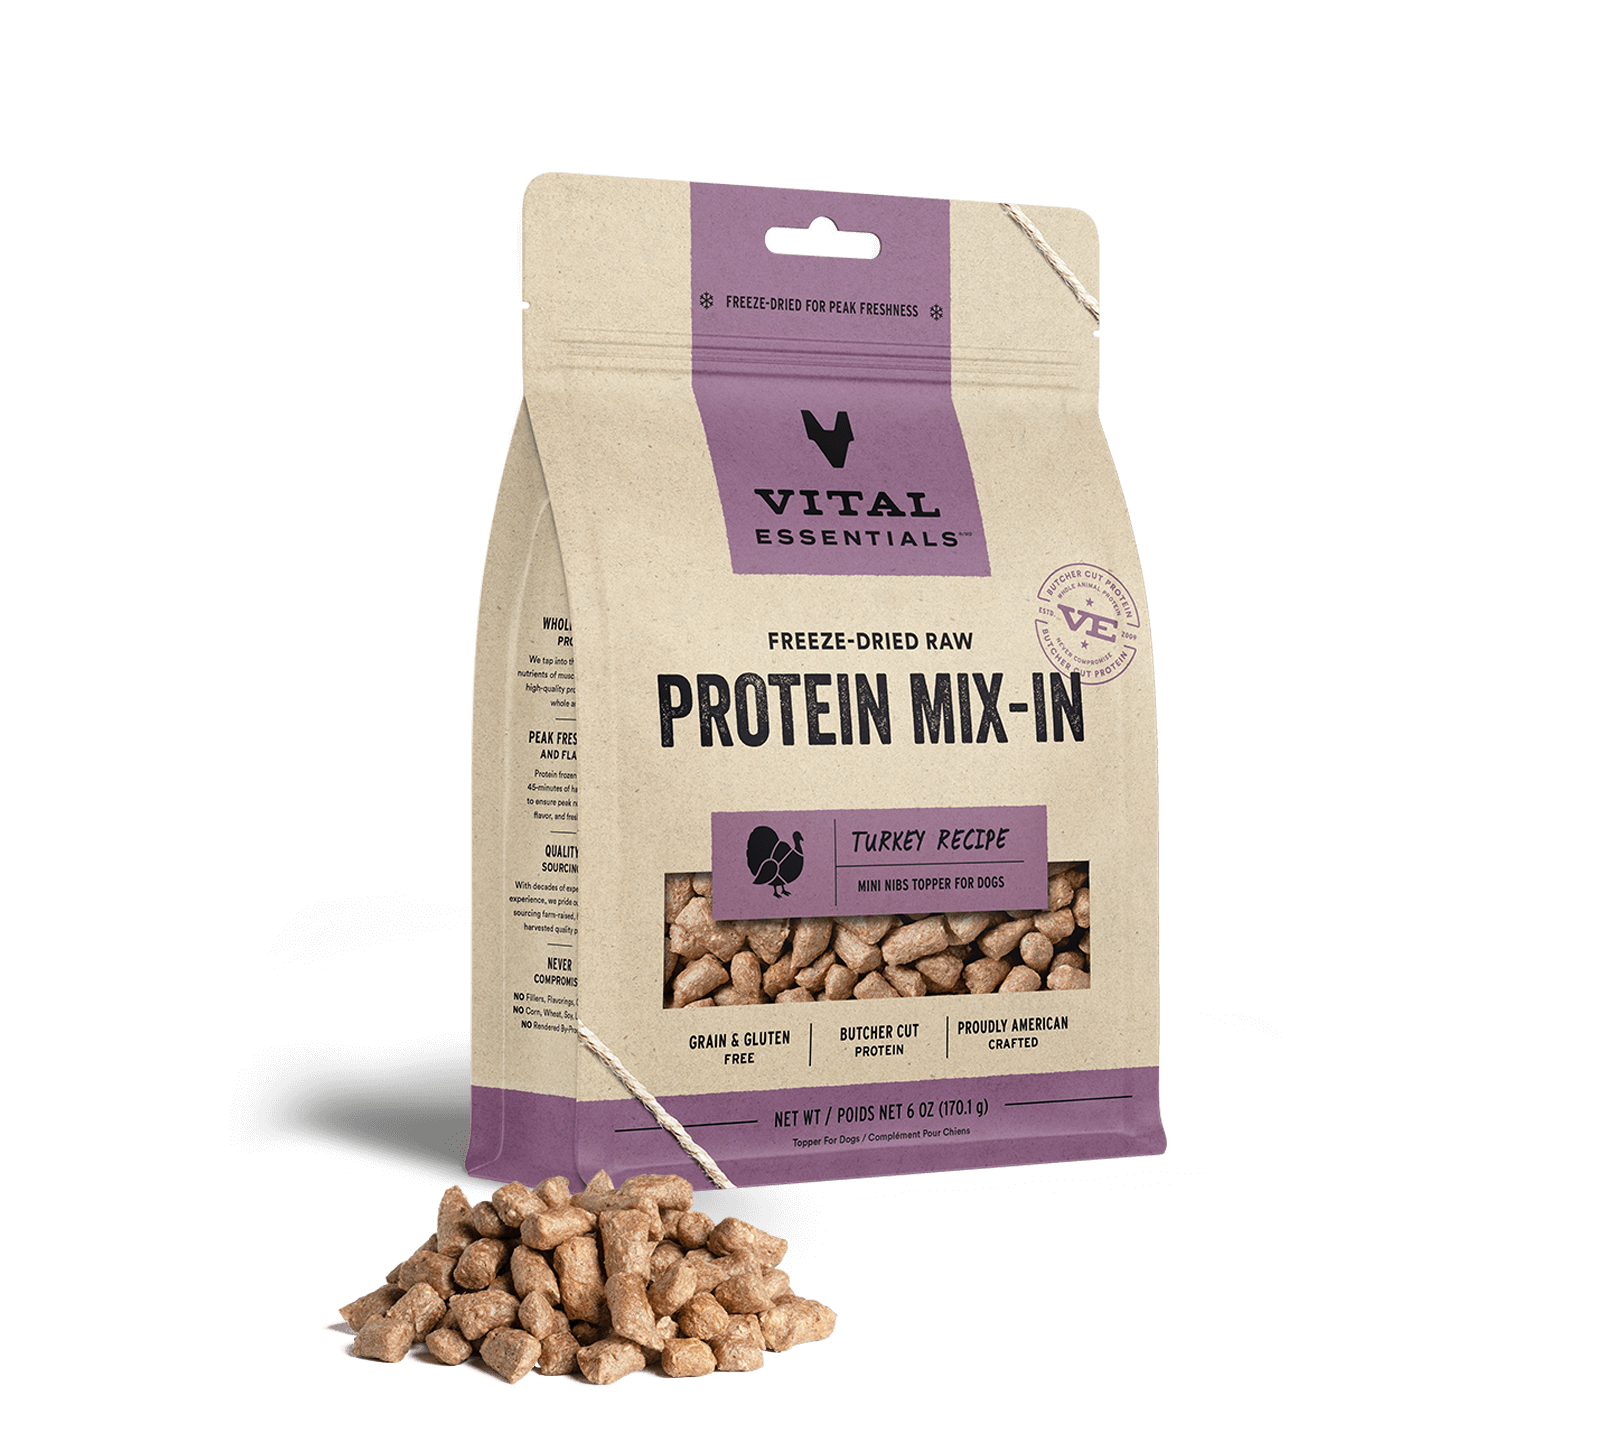 Vital Essentials Freeze-Dried Raw Protein Mix-In Turkey Recipe Mini Nibs Topper for Dogs, 6 oz - Items on Sale Now